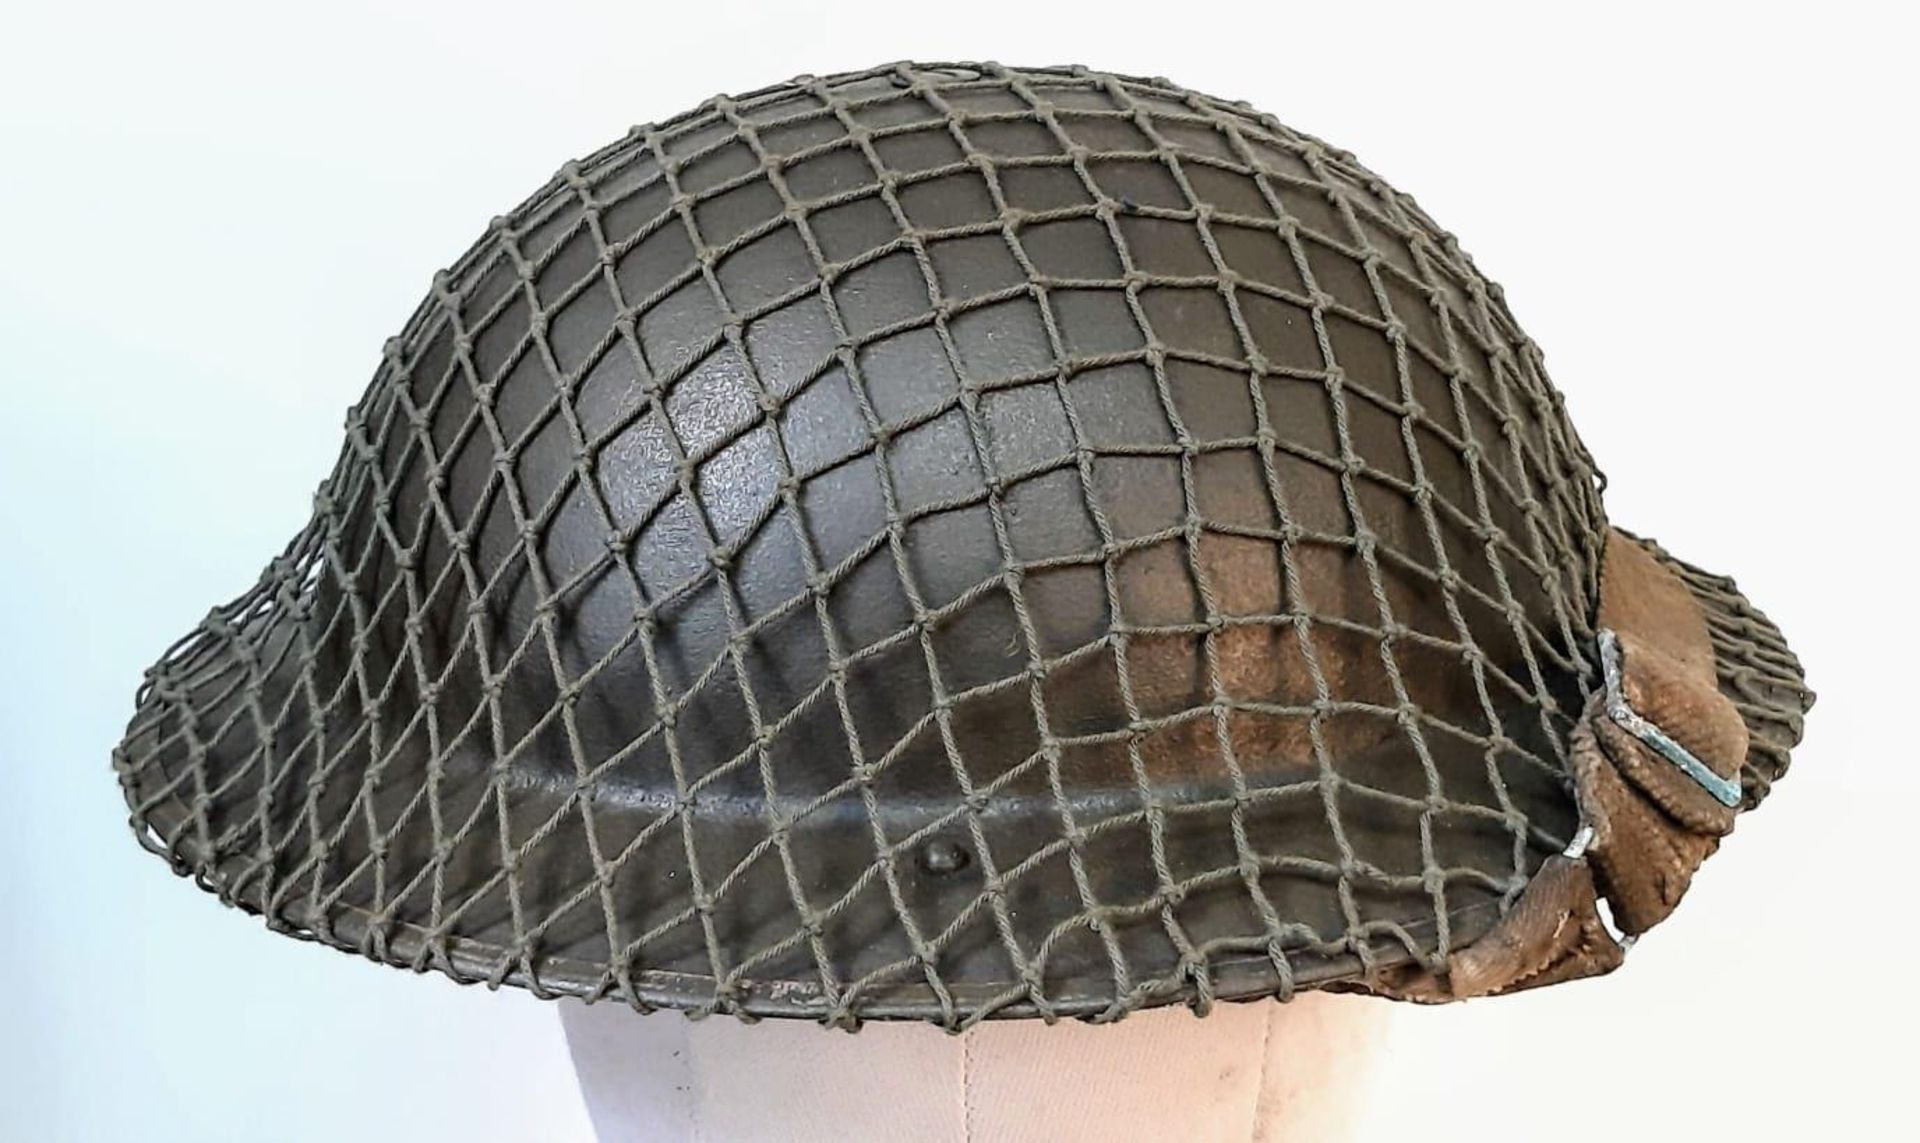 WW2 British MK II Helmet with Cam Net and 1944 Dated (D-Day) Field Dressing. - Image 3 of 5